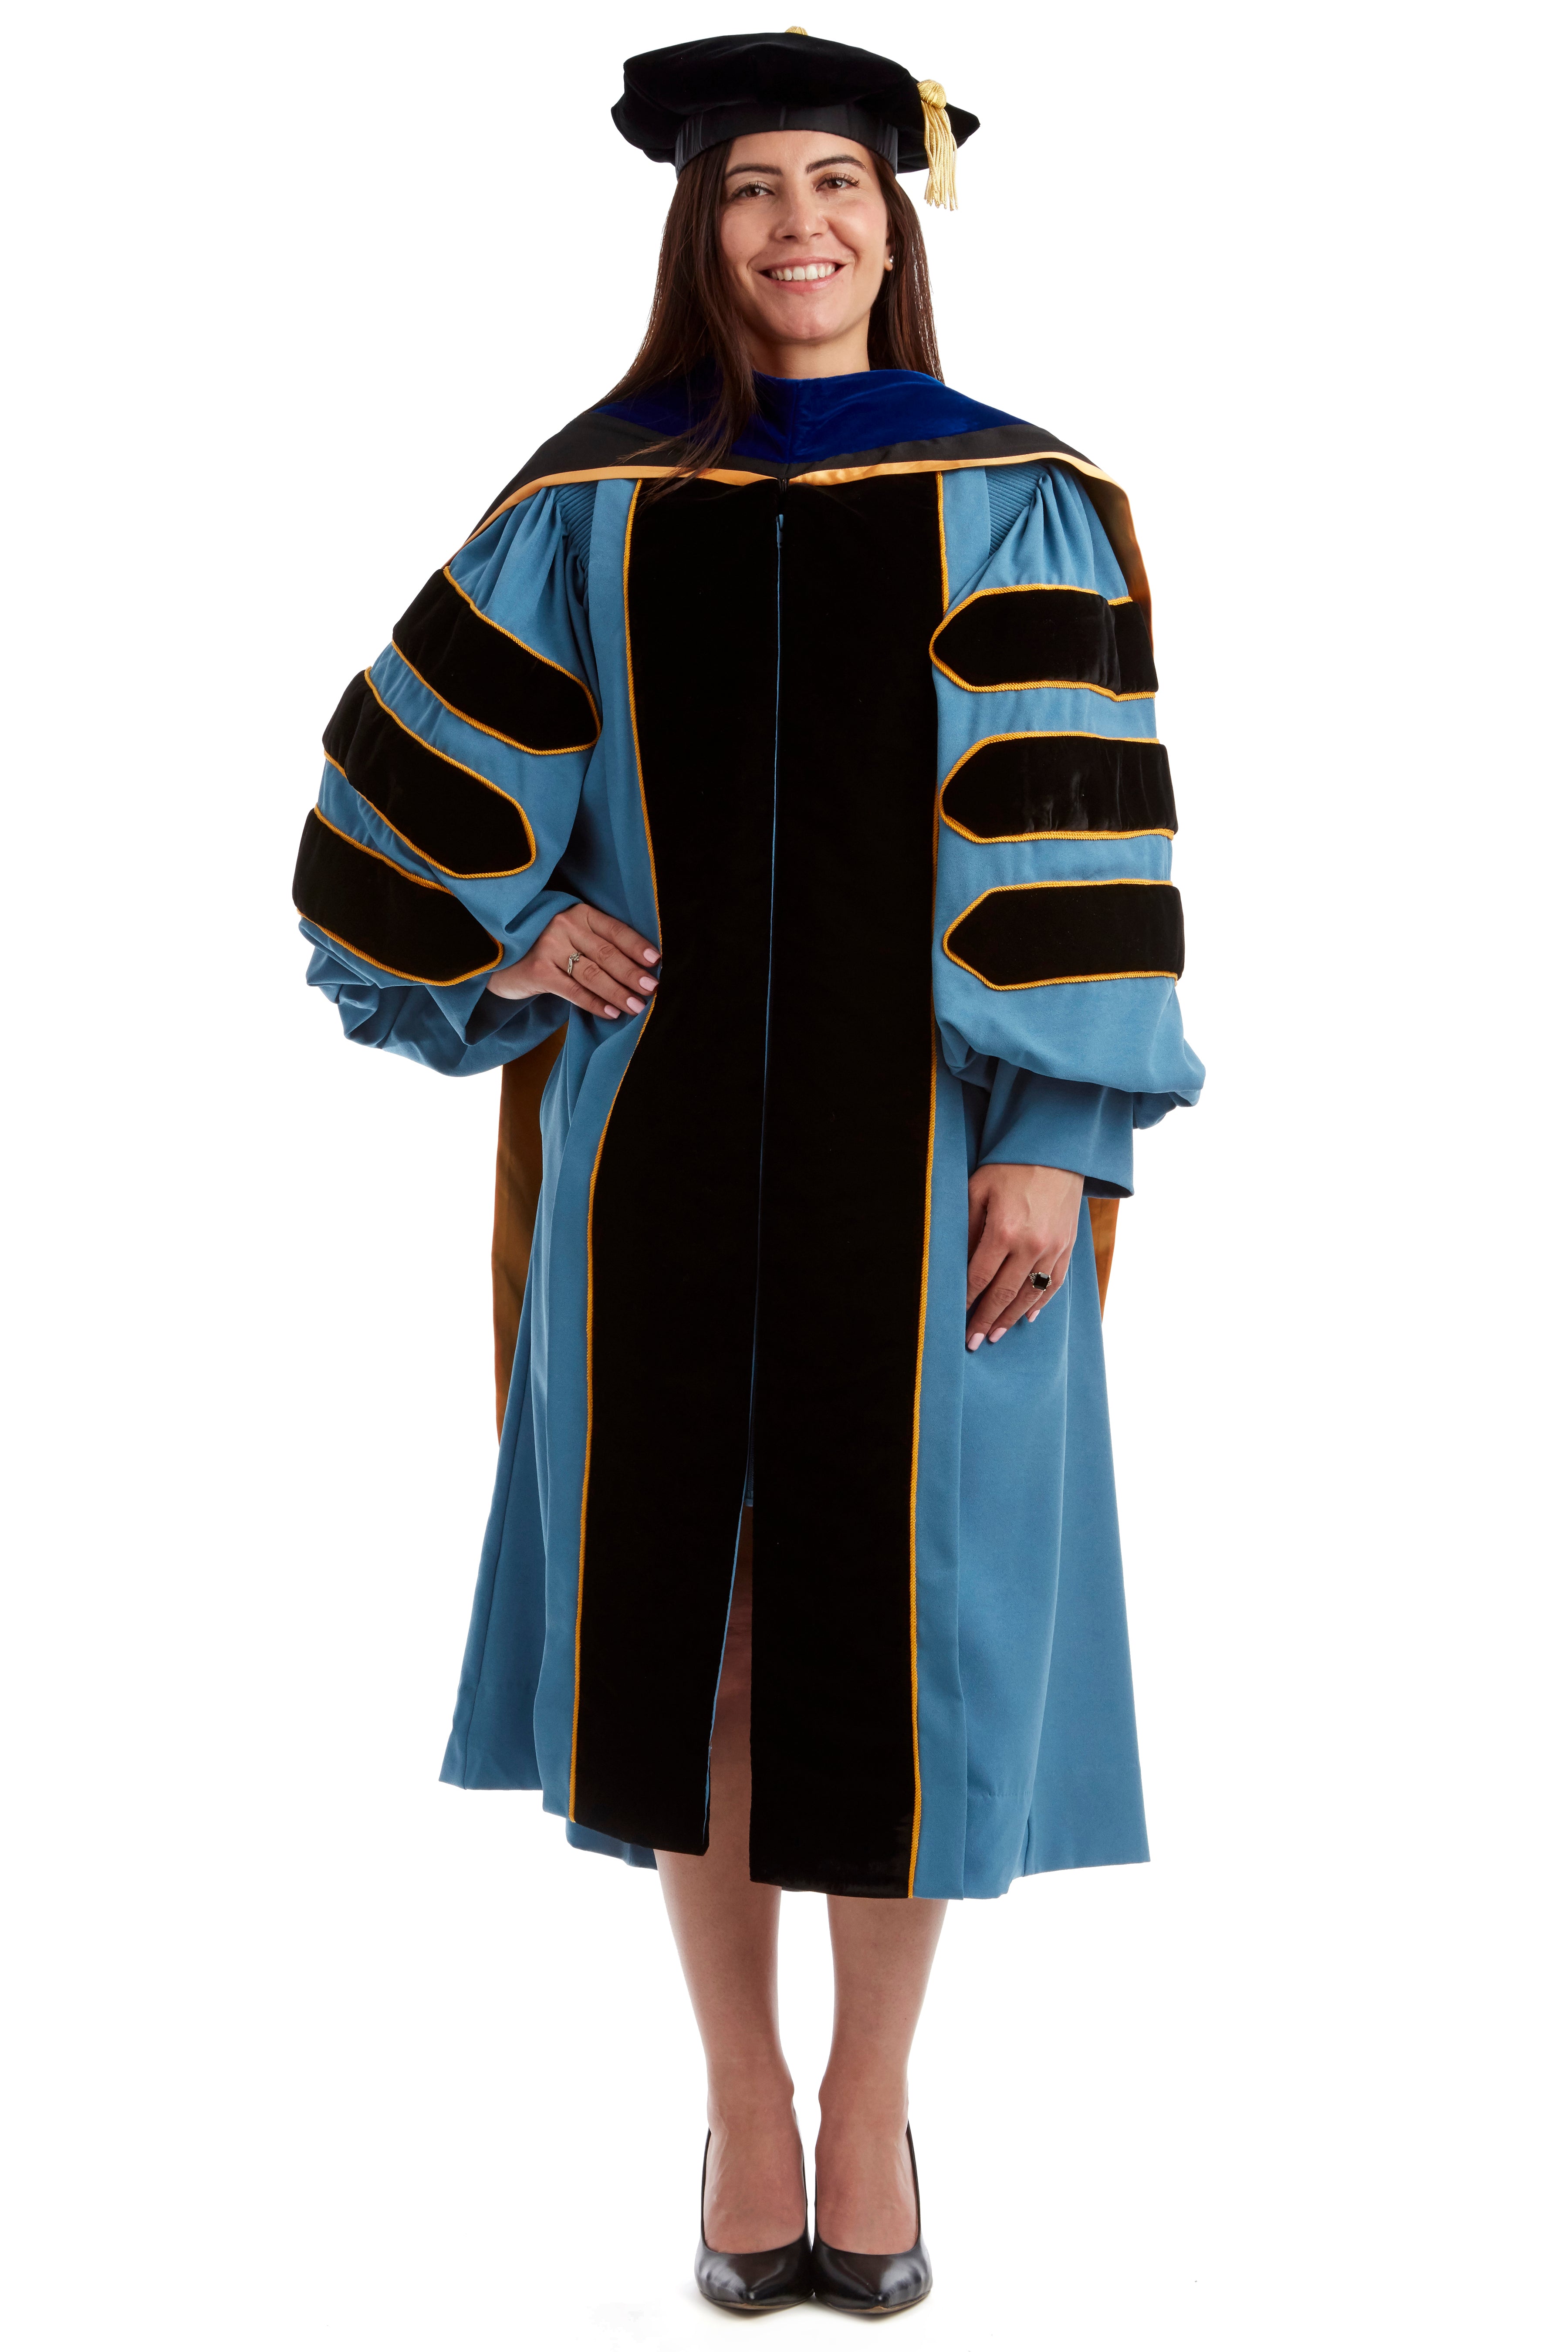 University of Michigan PhD Regalia Rental Set. Doctoral Gown, PhD Hood, and eight sided doctoral Tam with silk or gold bullion tassel